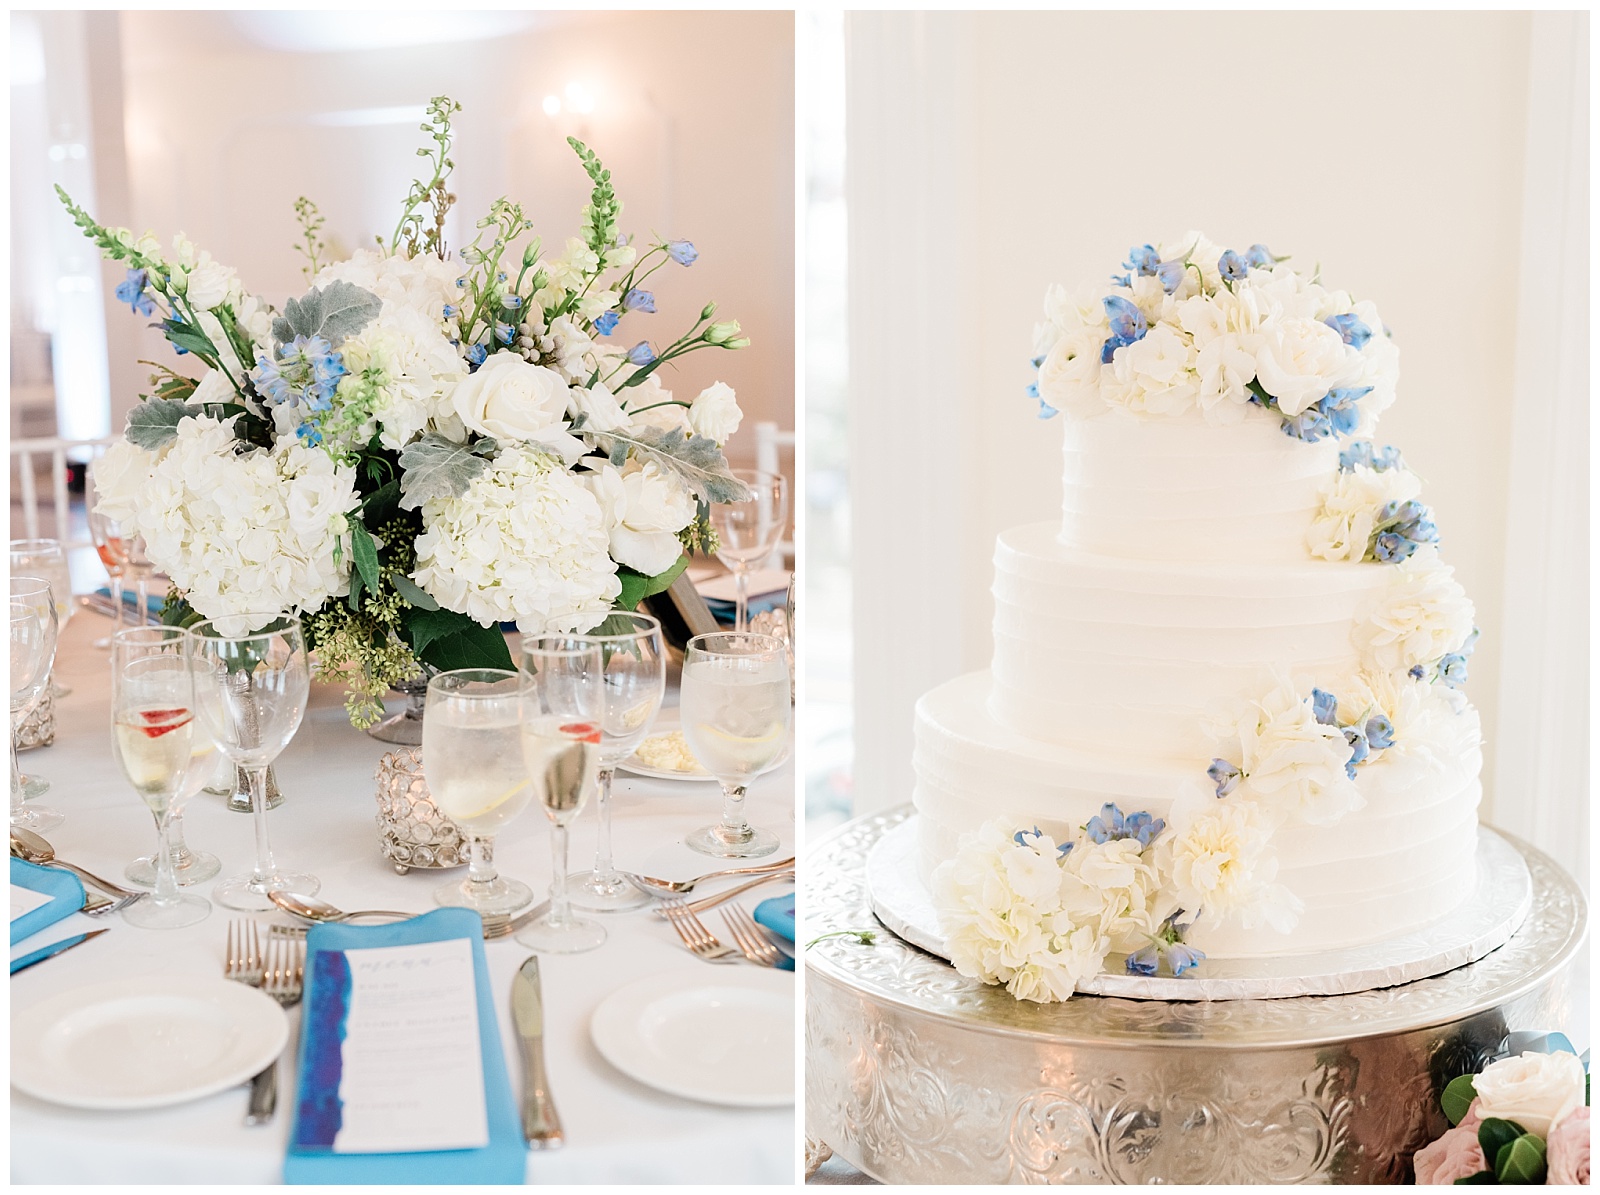 White and blue flowers decorate the table centerpieces and wedding cake at the reception.